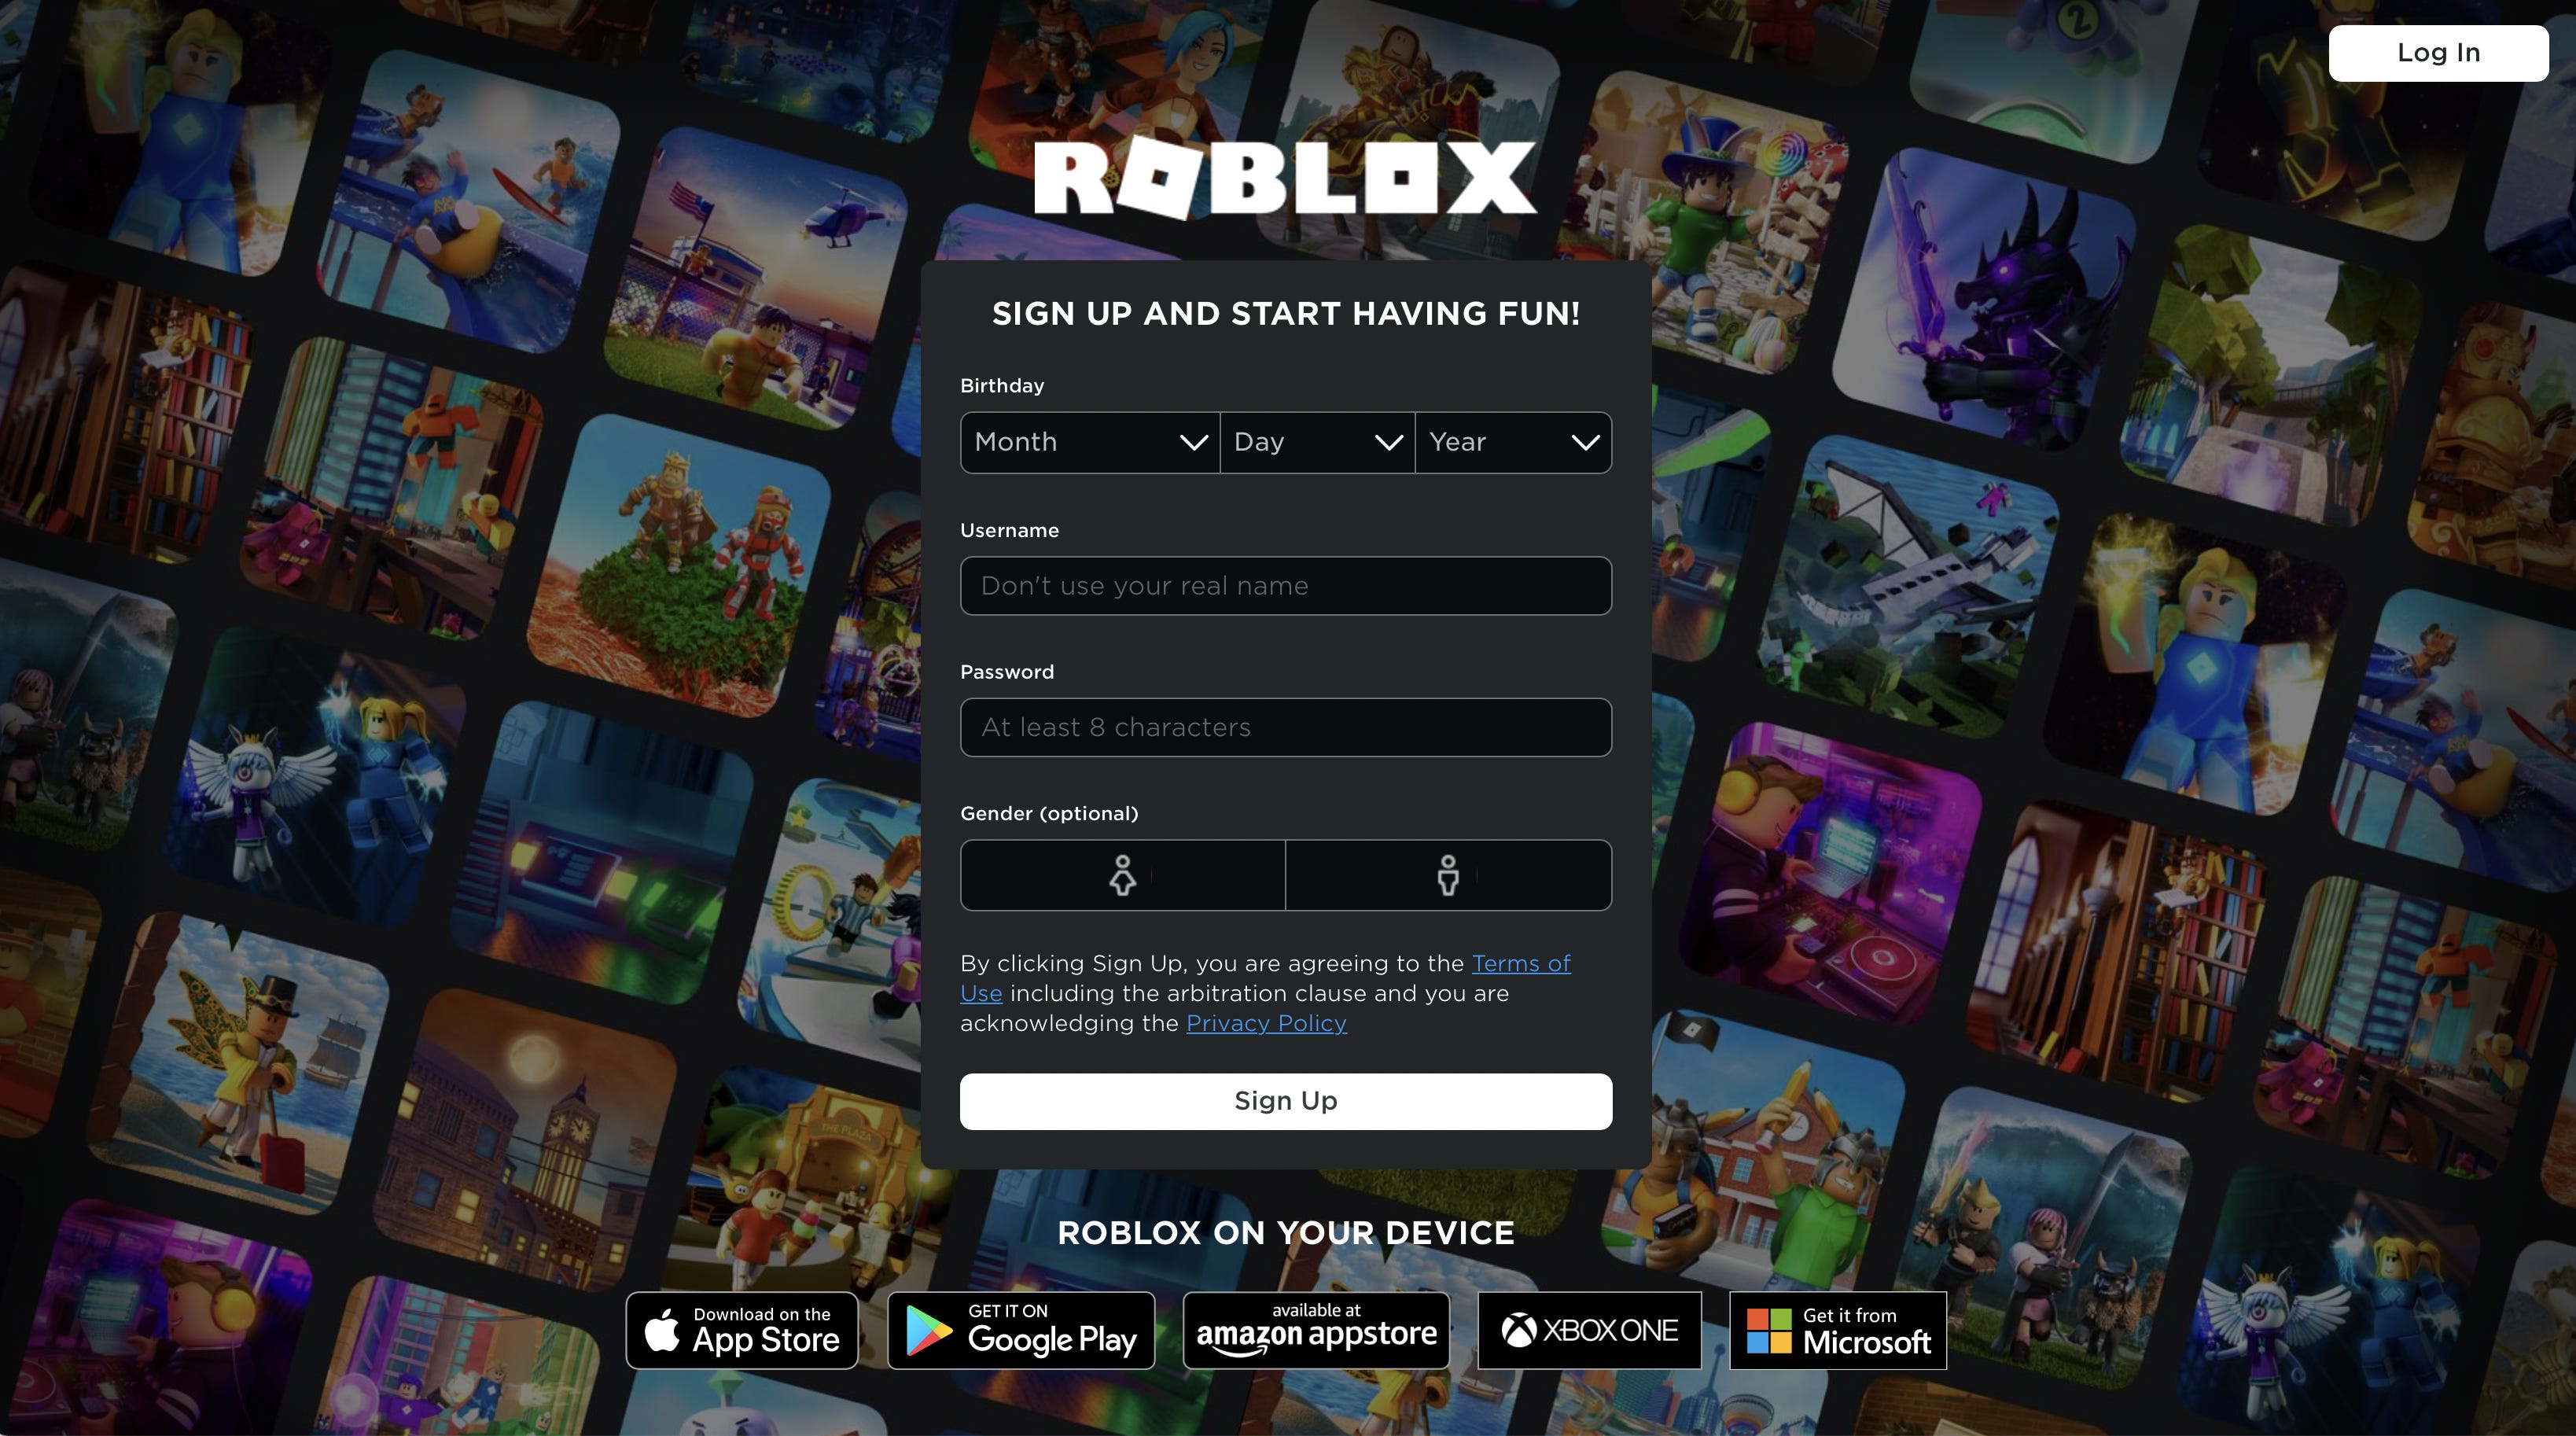 Roblox S Growth Strategies And Why Becoming A Metaverse Is A Bad Idea By Benjamin Schroeder No Ordinary Strategy - what is the name of the creator of roblox